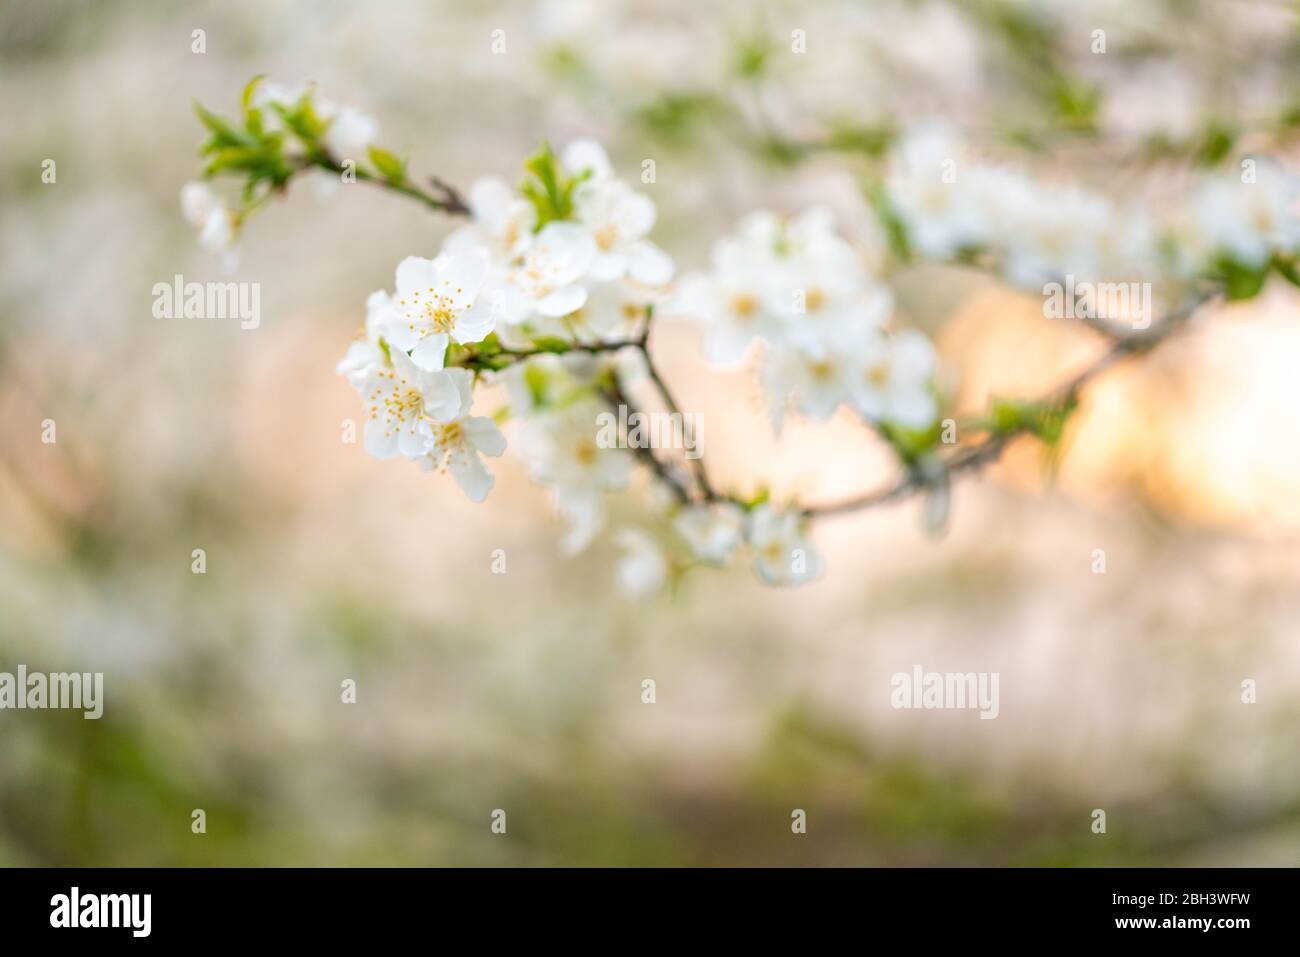 Tree blossom in full bloom. Cherry flowers in small clusters on a fruit tree branch, fading in to white. Shallow depth of field. Focus on center flowe Stock Photo